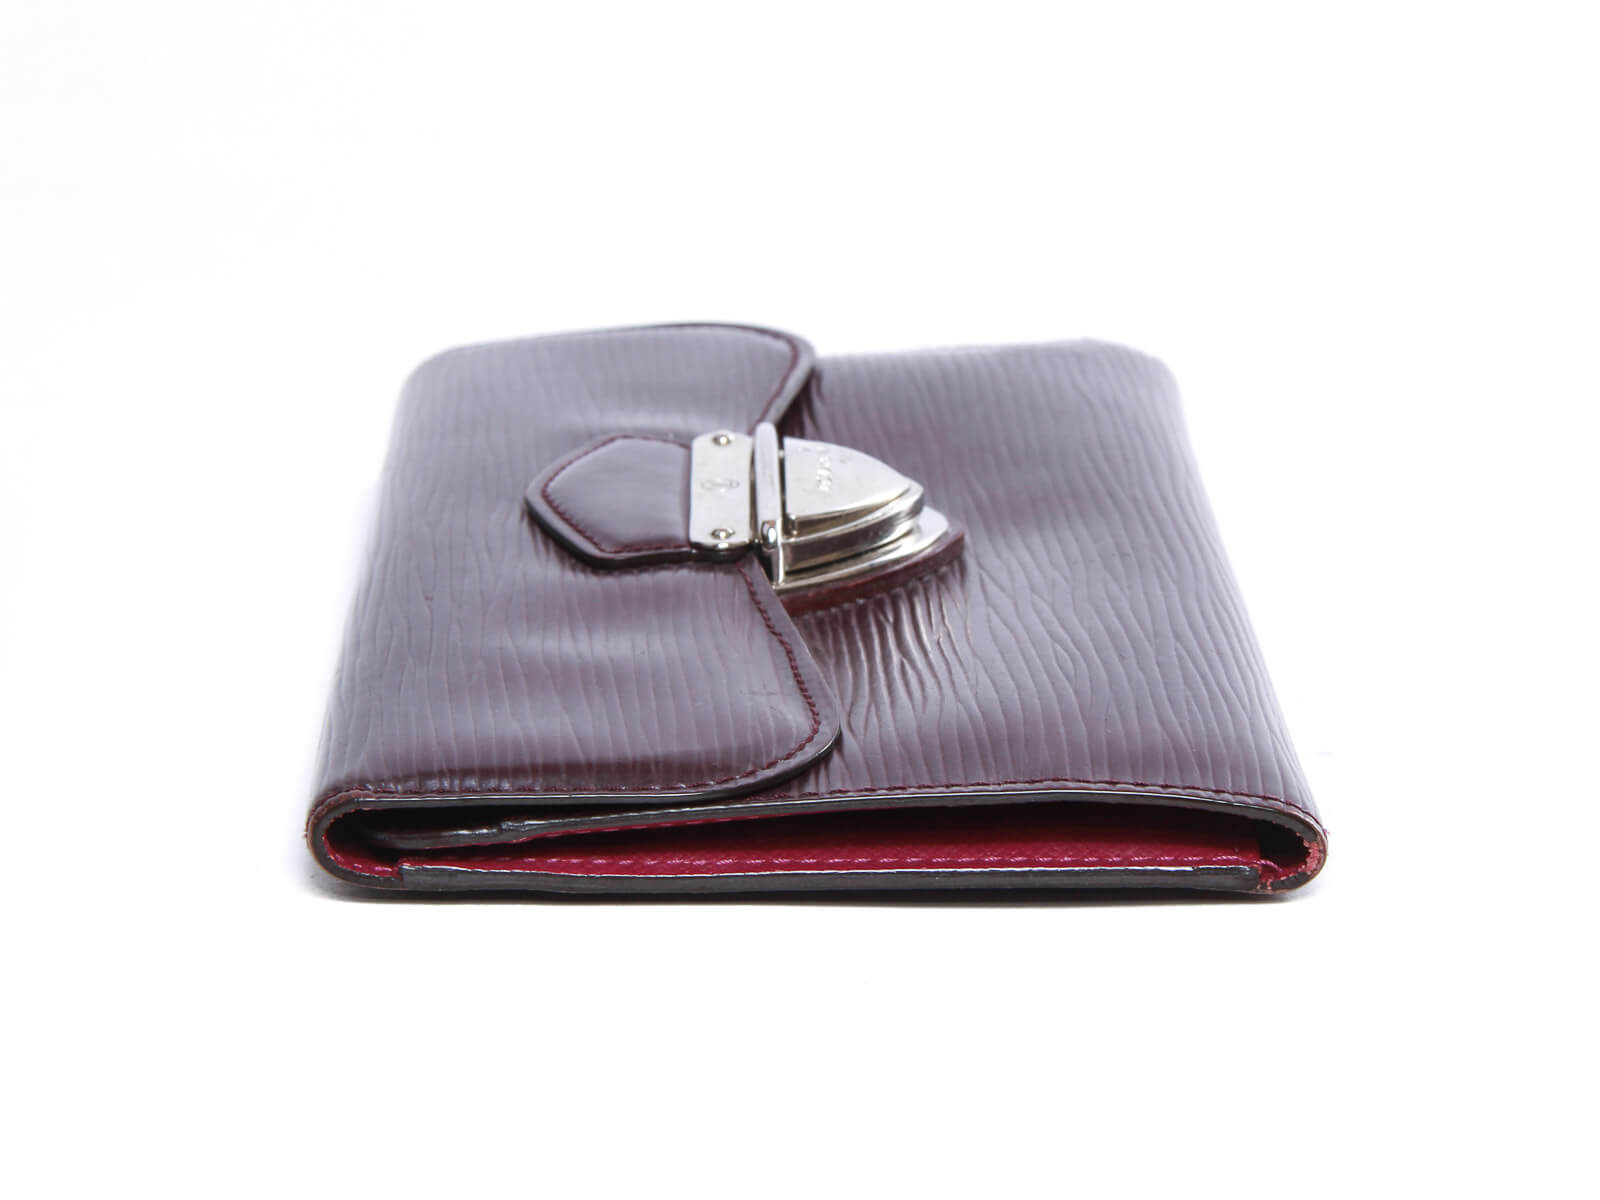 Clémence Wallet Epi Leather - Wallets and Small Leather Goods